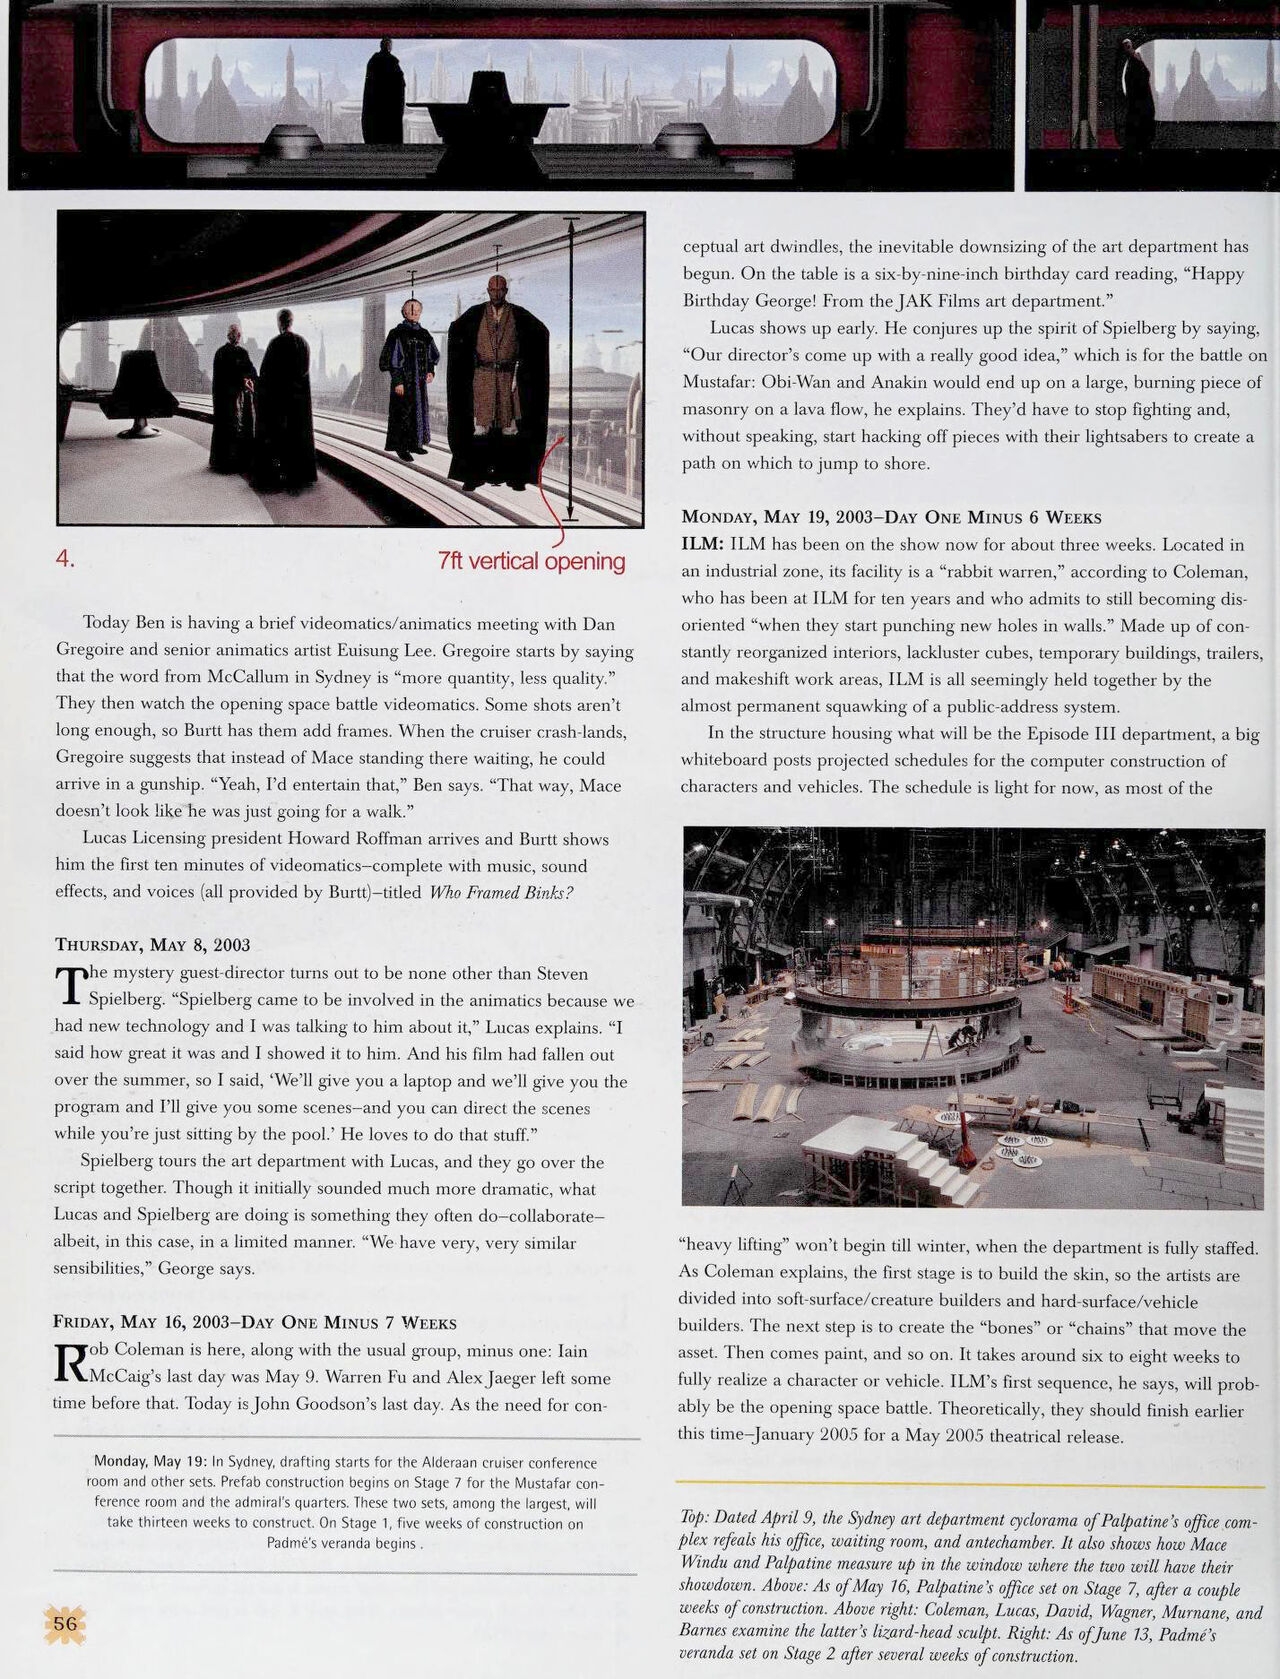 The Making of Star Wars: Revenge of the Sith 57